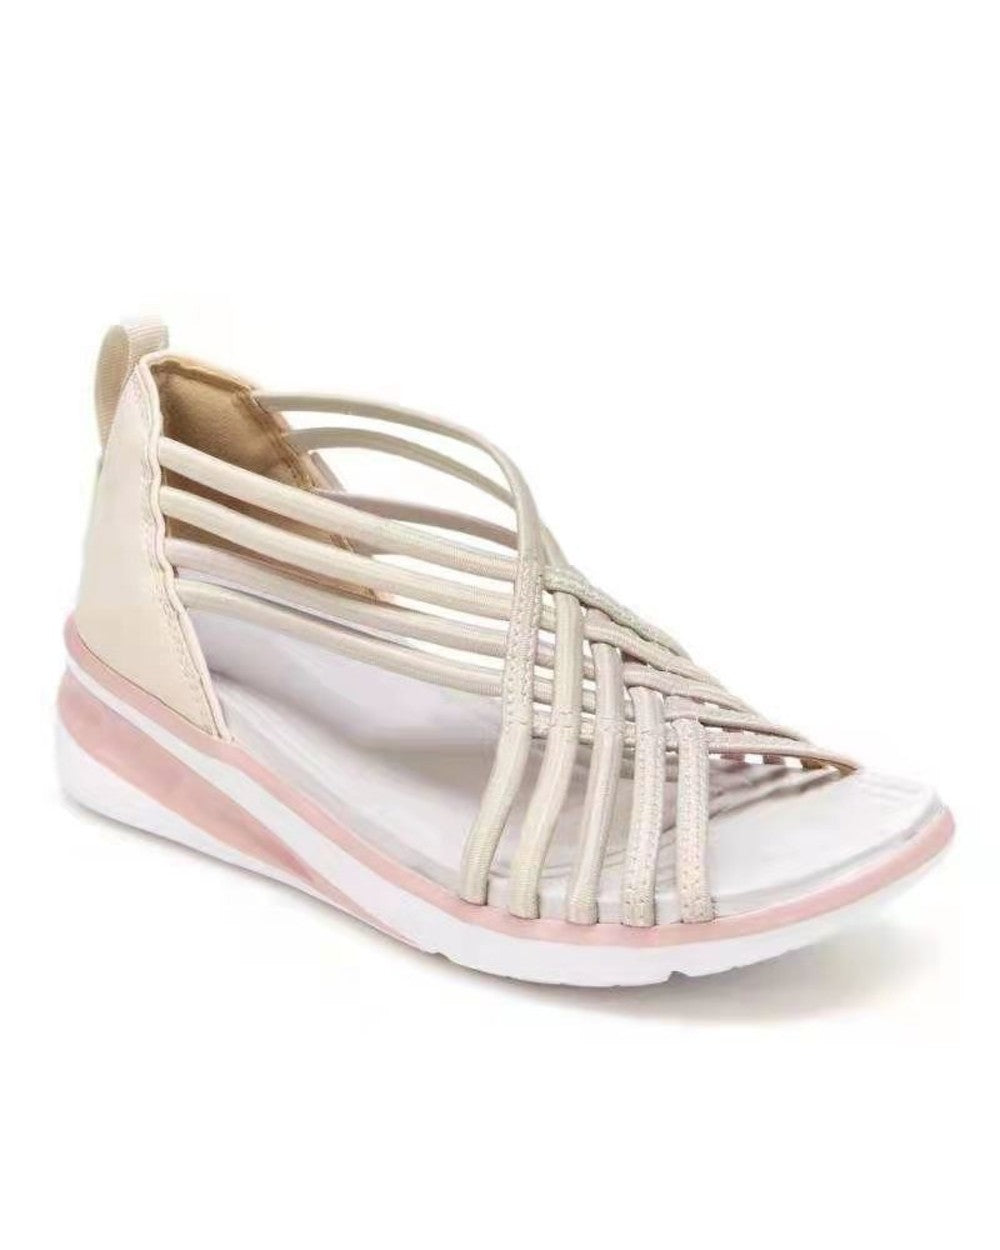 SUMMER SALE -Water-Ready Sporty Step-In Sandal